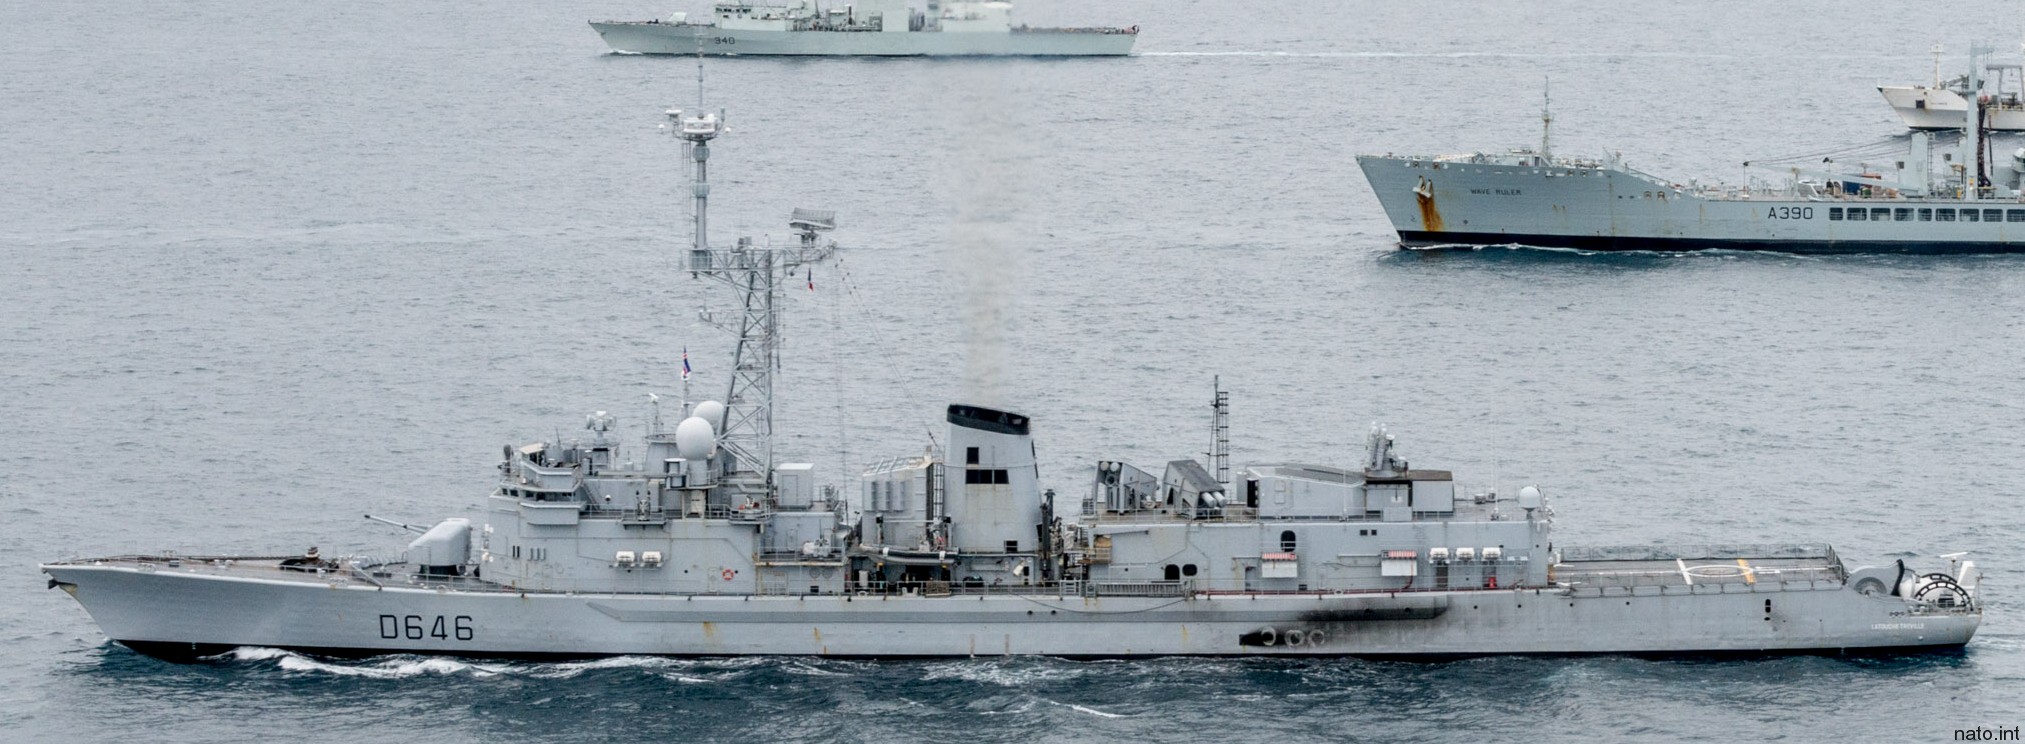 d-646 fs latouche treville f70as frigate destroyer asw french navy marine nationale 12